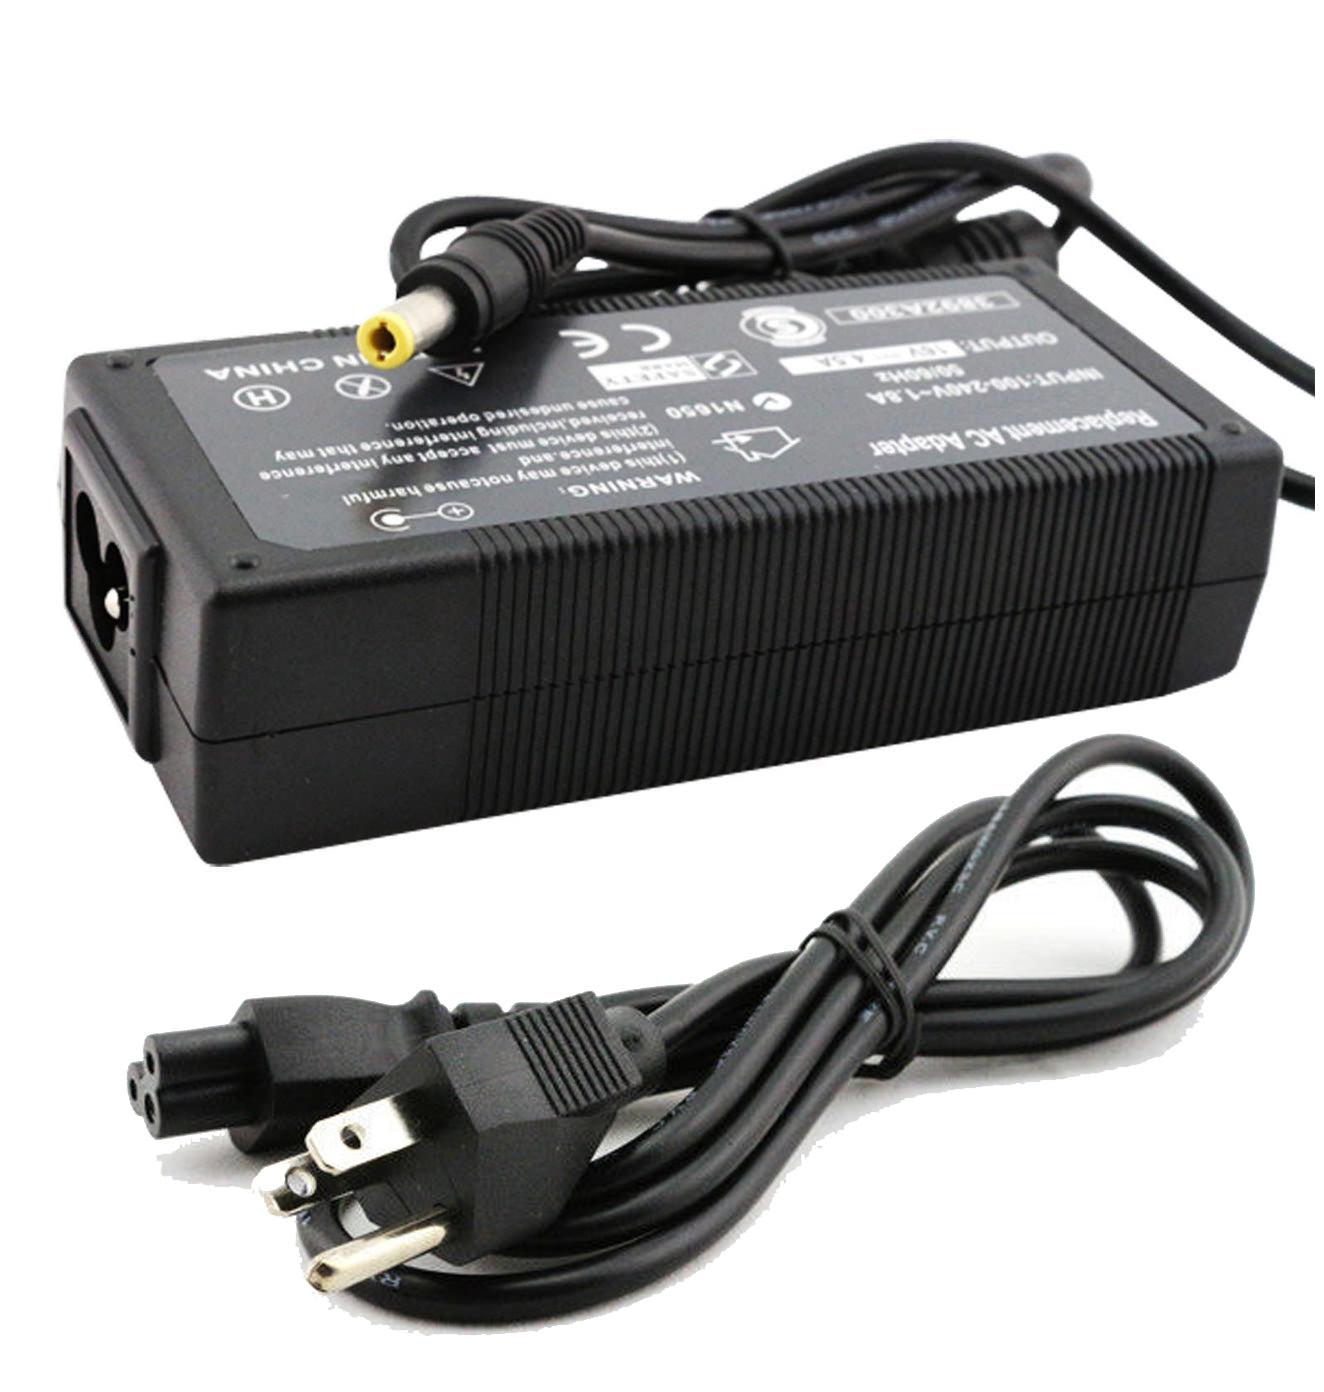 AC Adapter Charger for IBM ThinkPad T24 Notebook.